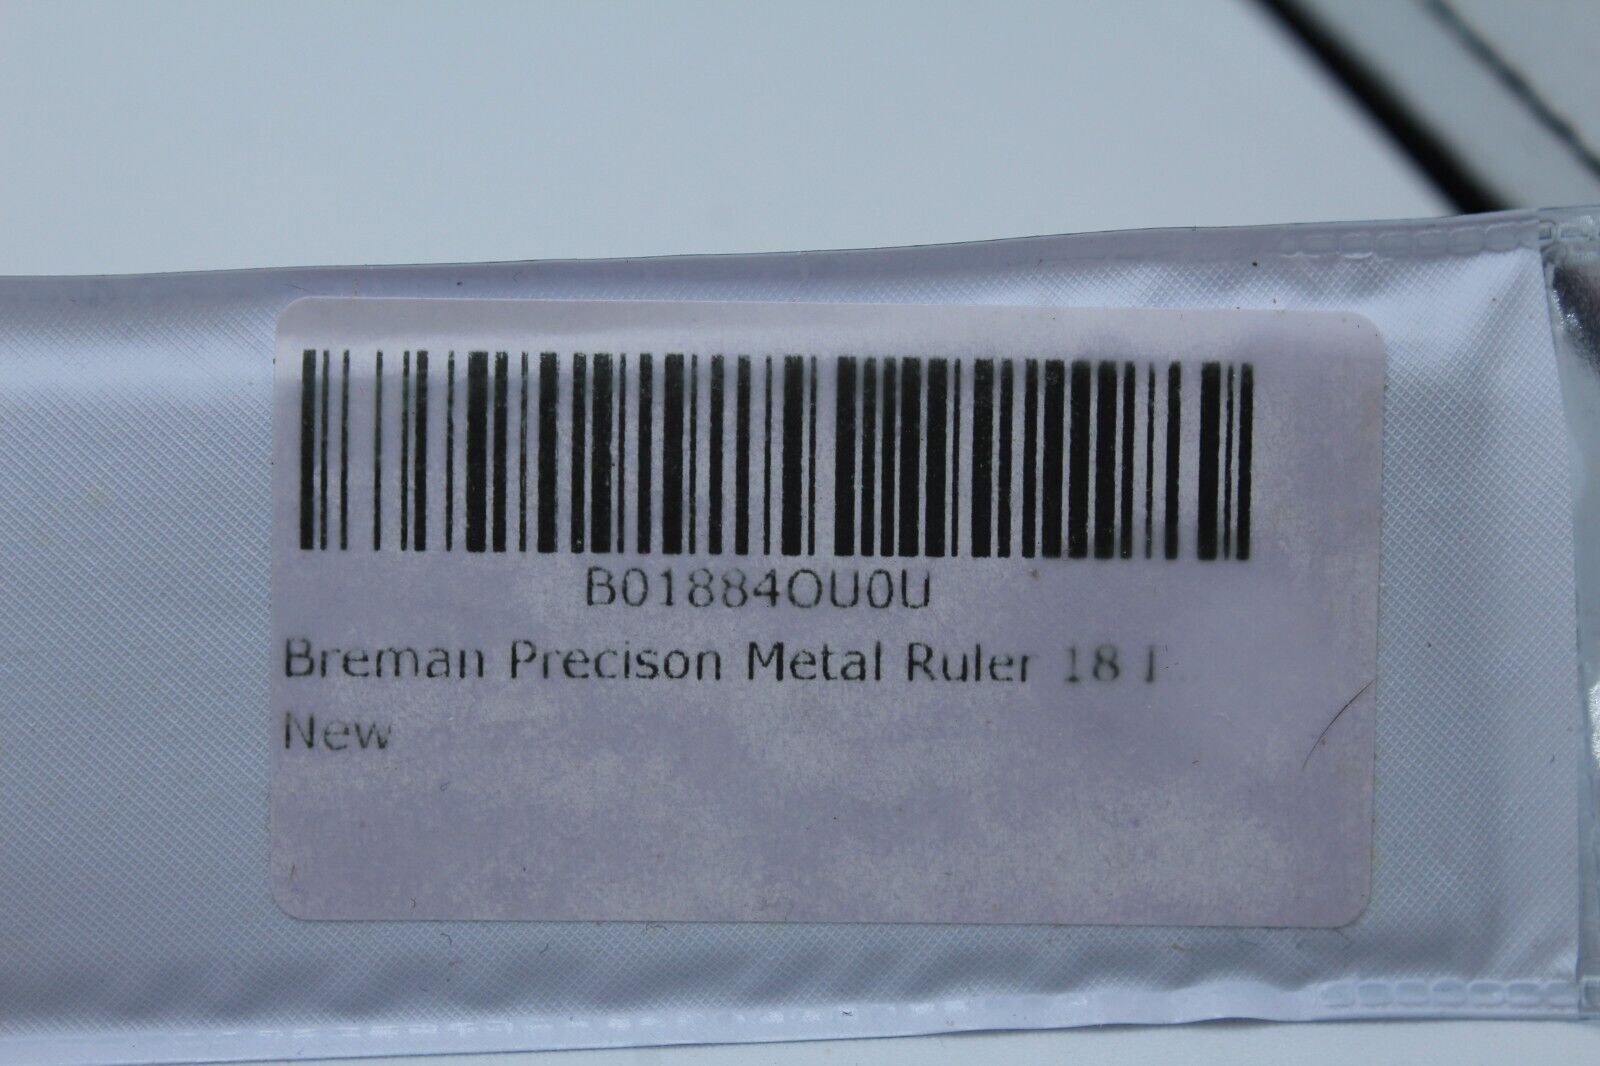 Breman Precision Metal Rulers 12 Inch - Stainless Steel Corked